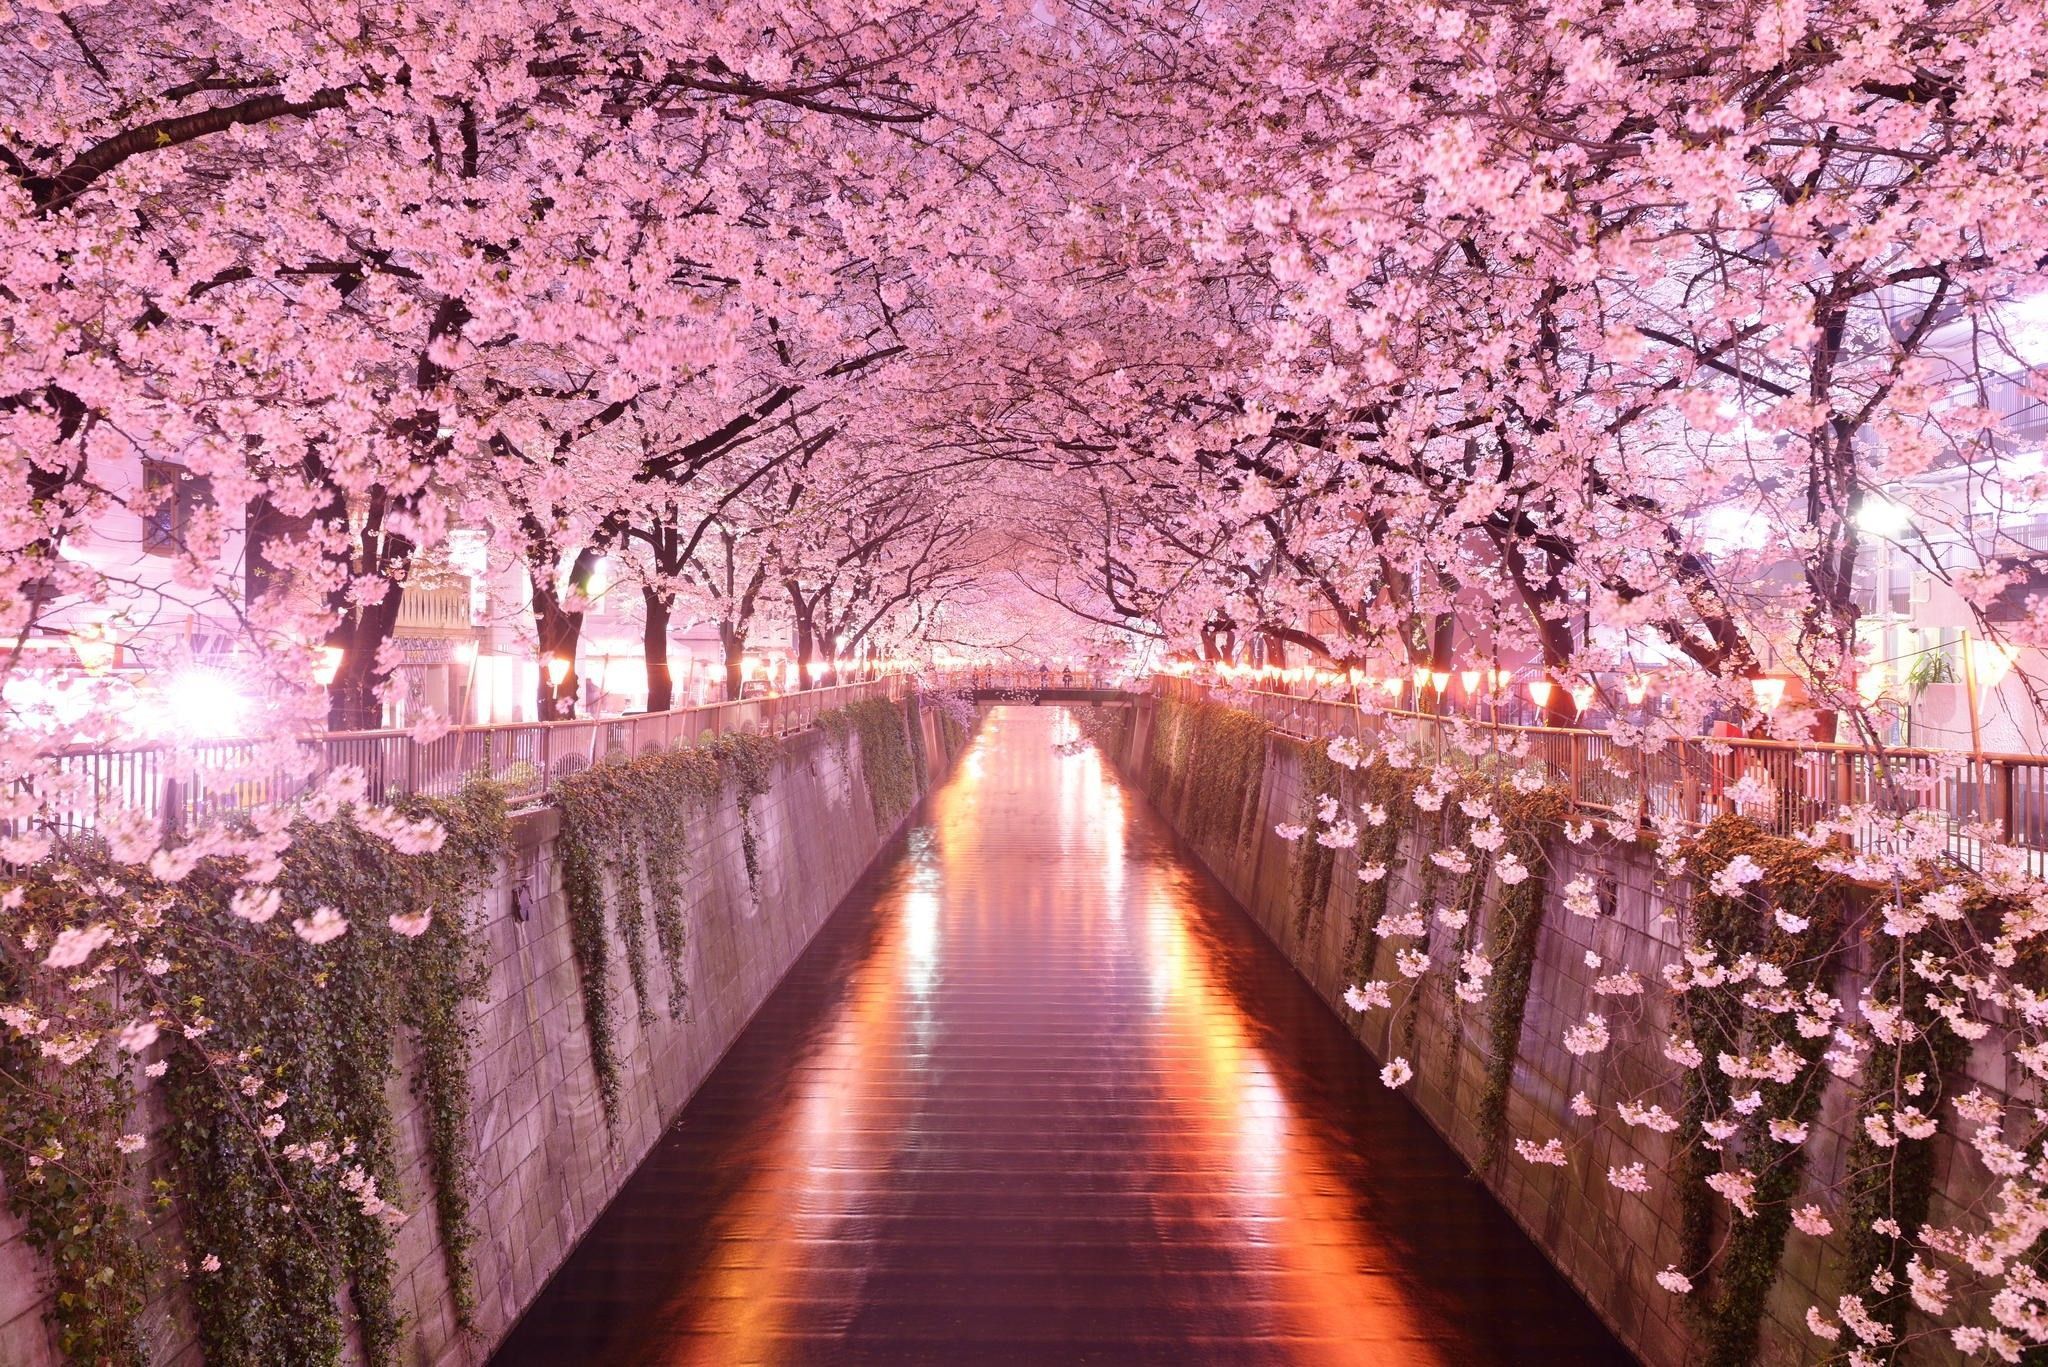 A path under cherry blossom trees at night - Cherry blossom